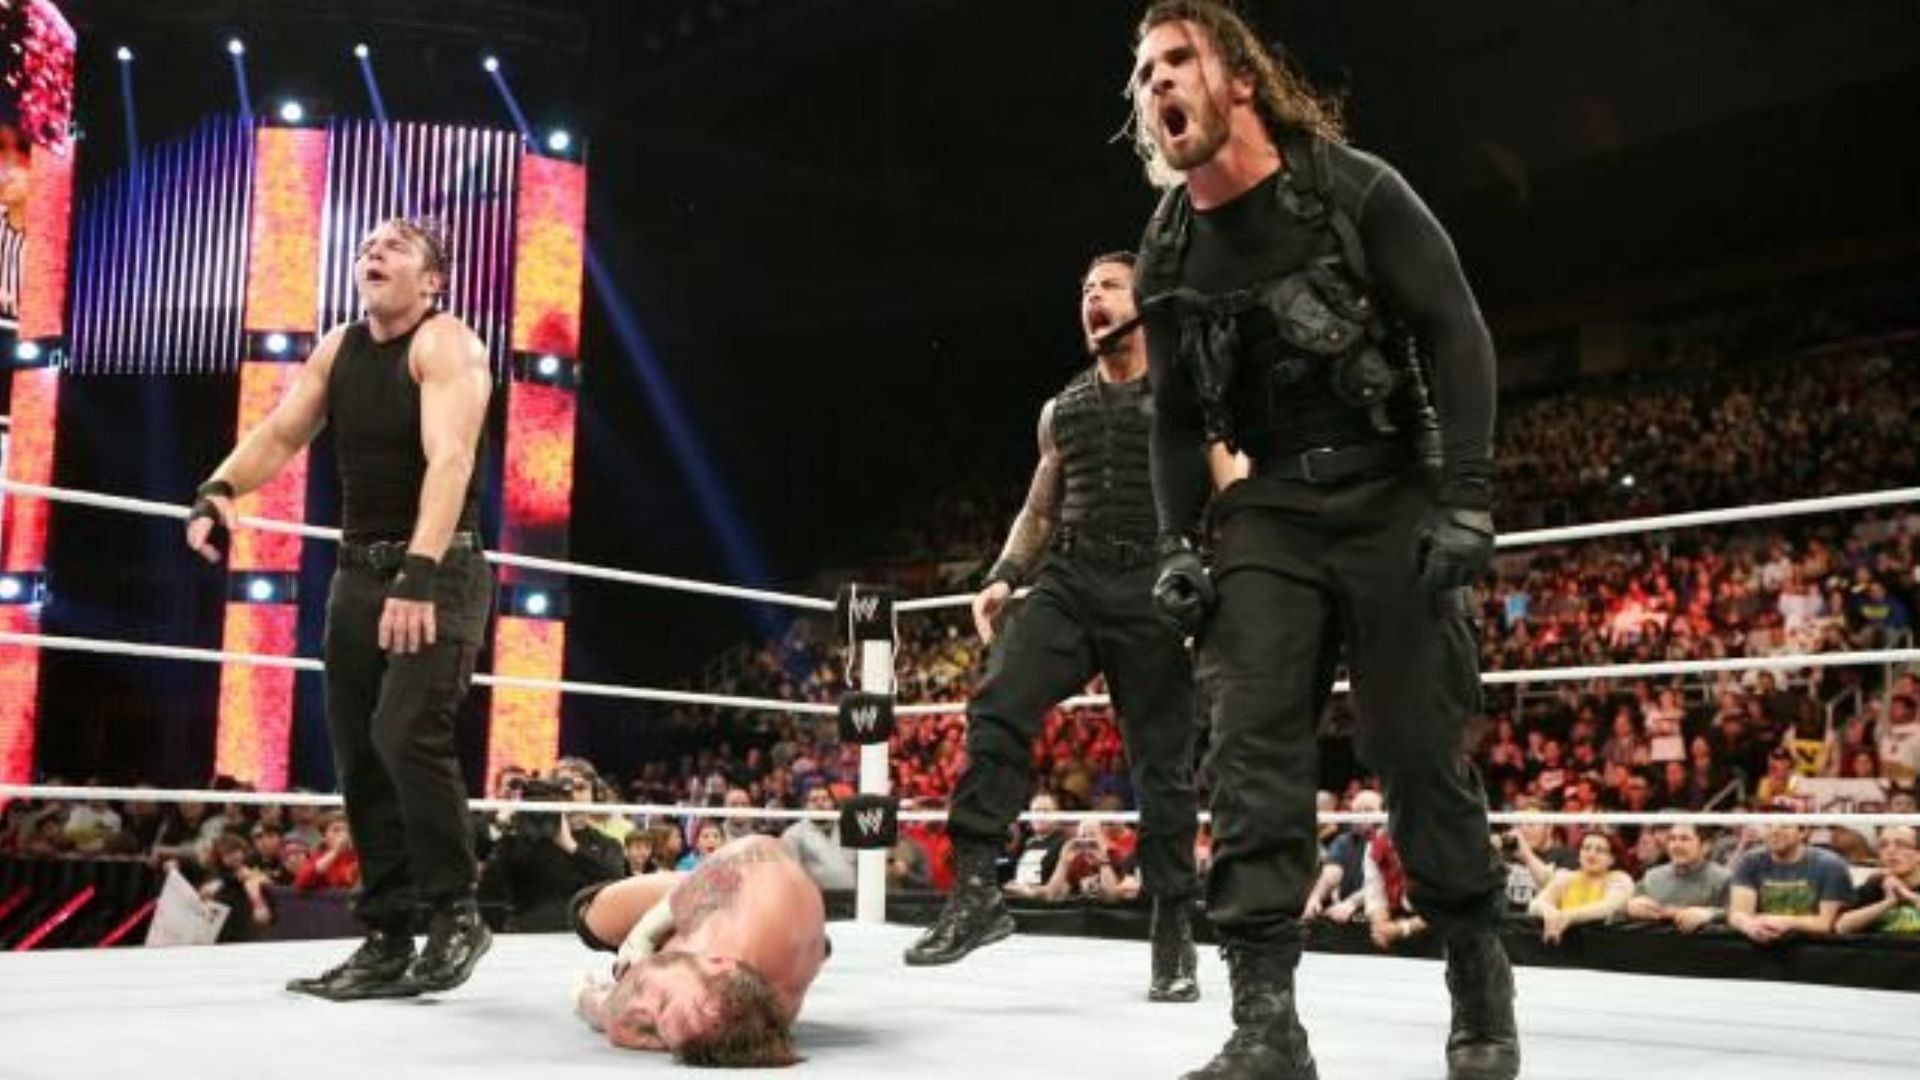 The Shield pose after destroying CM Punk at a WWE show.